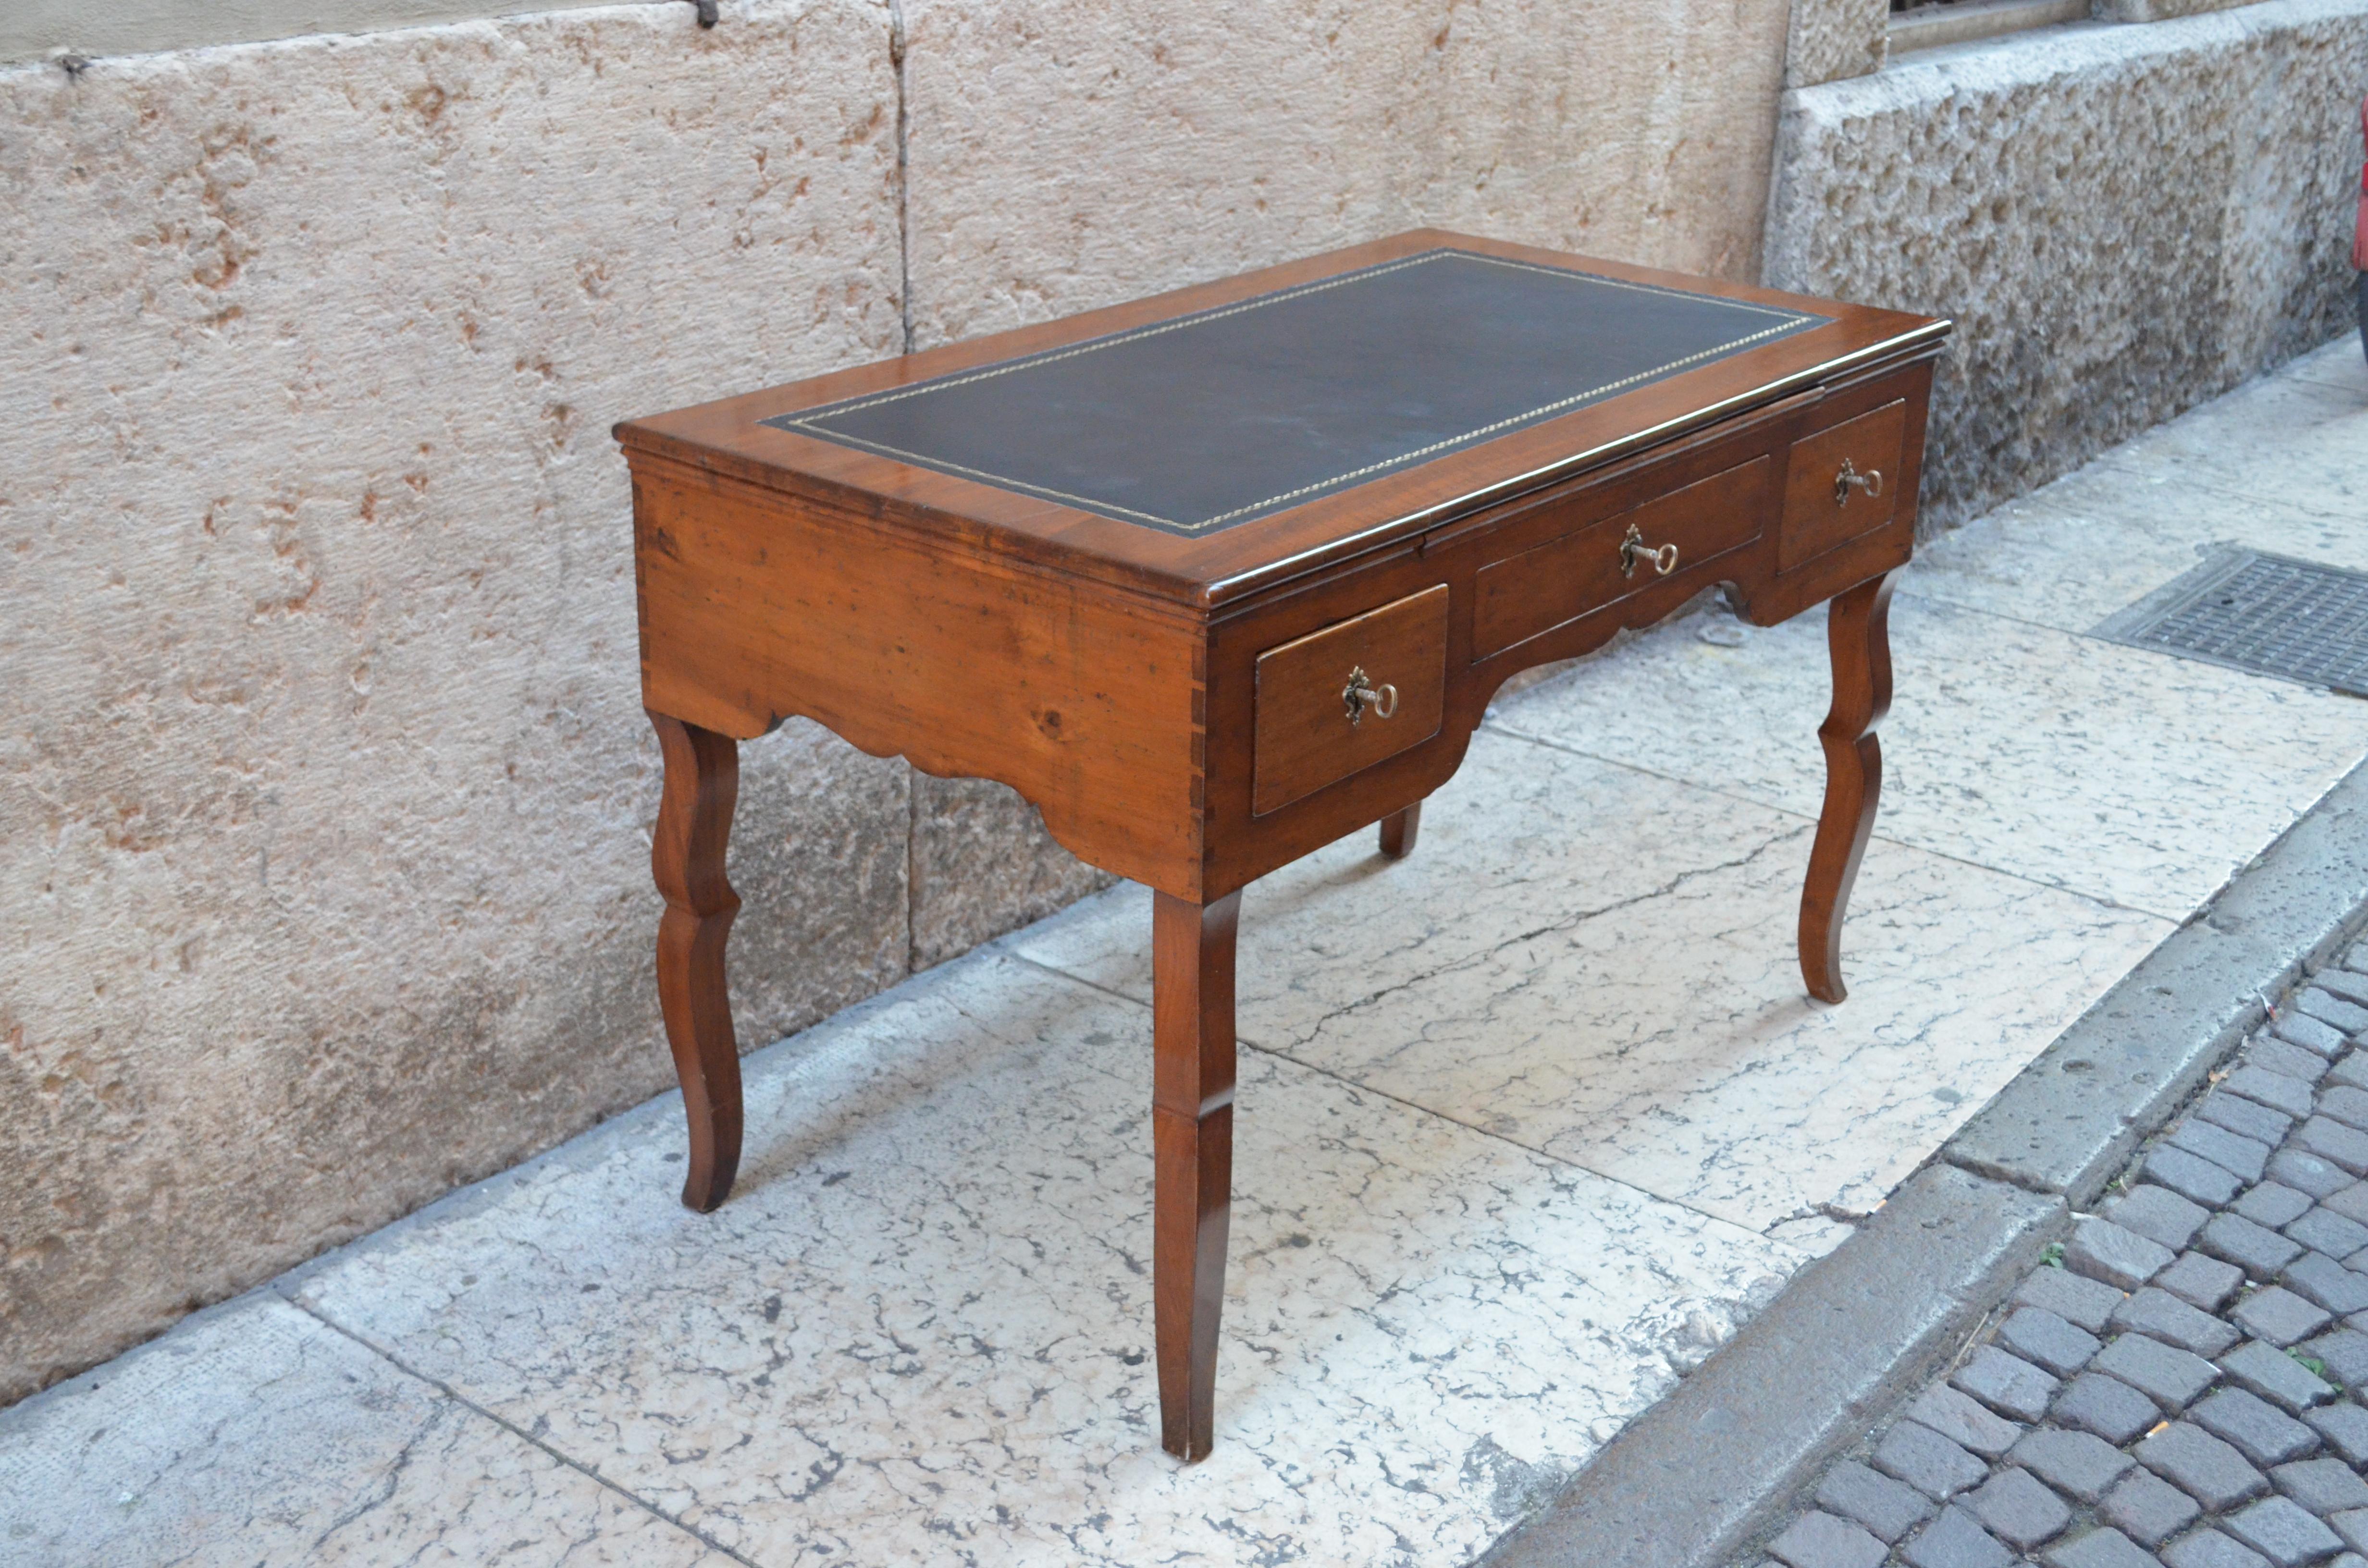 Italian walnut wood desk from late 18th century. Take a look at the legs of this desk which are incredibly shaped. The desk as three drawers. There is a tray to extend the writing surface. Original hardware and lockers. Still present and visible the